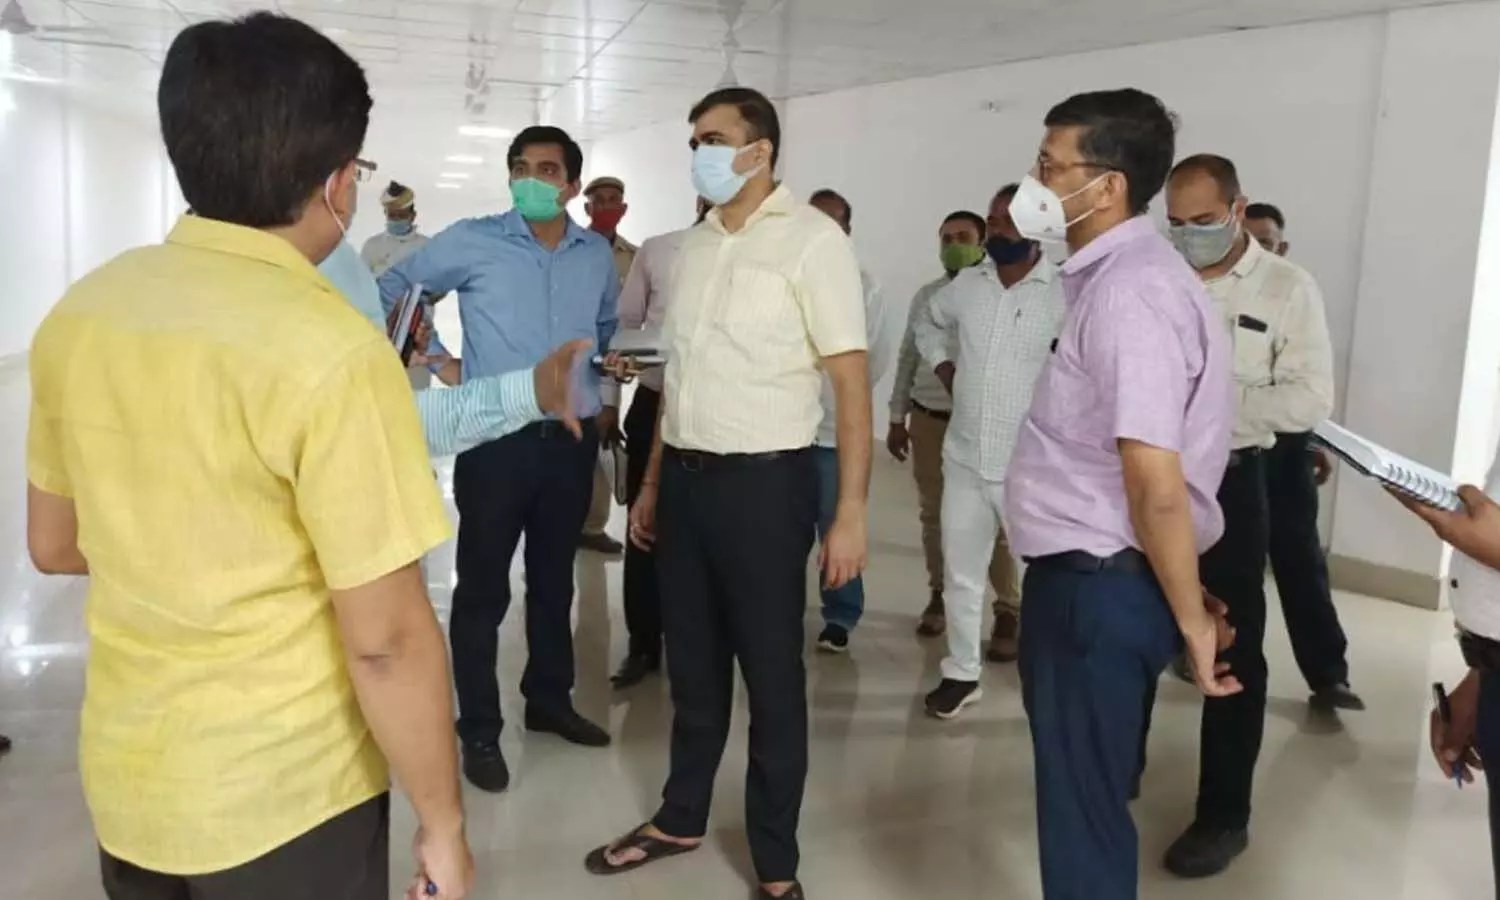 DM Abhishek Prakash gave instructions, said- private testing labs should give correct information about patients, CMO Manoj Agarwal was present